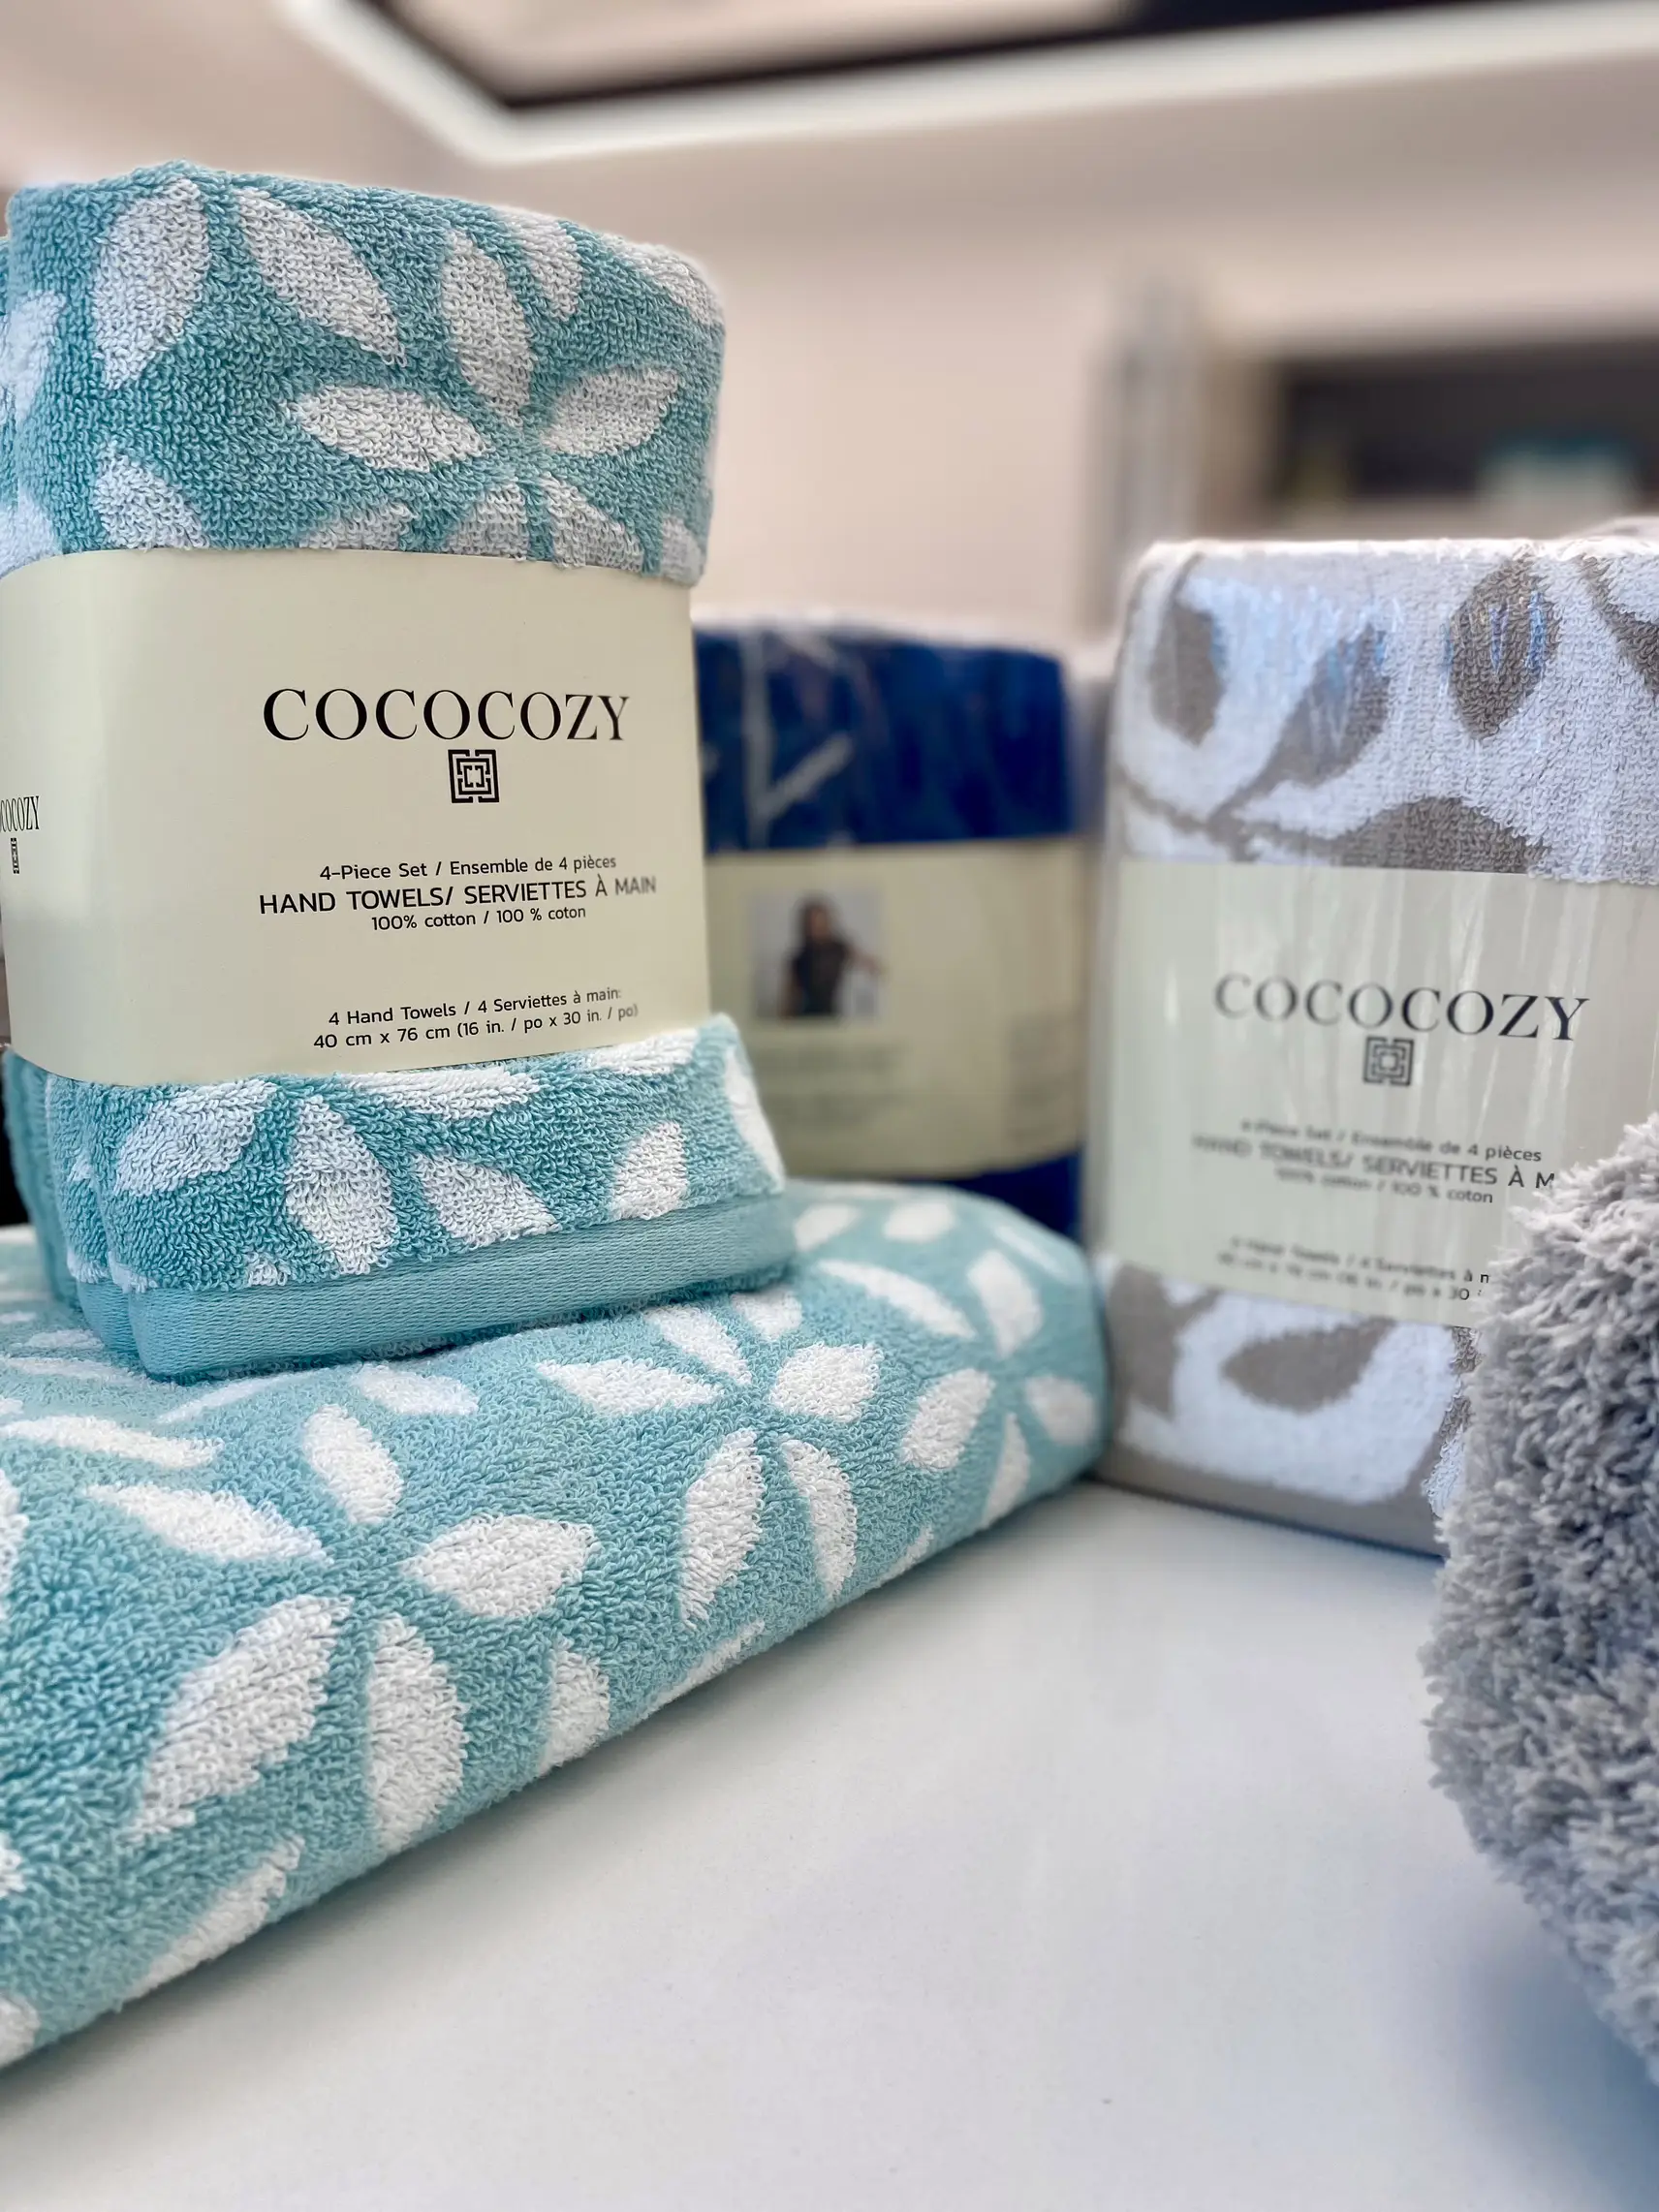 Introducing the COCOCOZY x Welspun Collection COCOCOZY